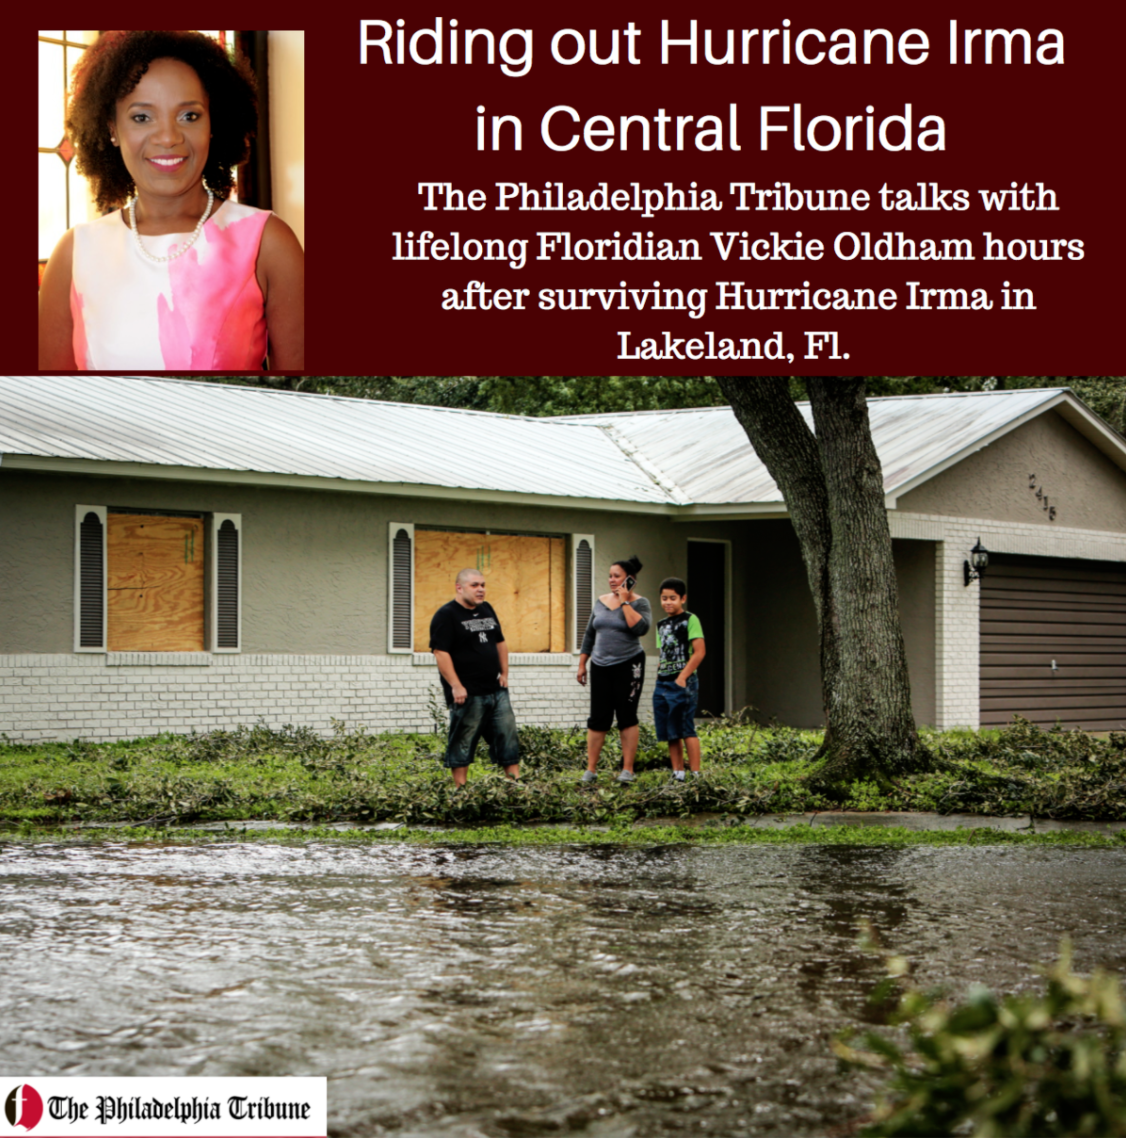 09/11/17: AUDIO: Riding out Hurricane Irma in Central Florida